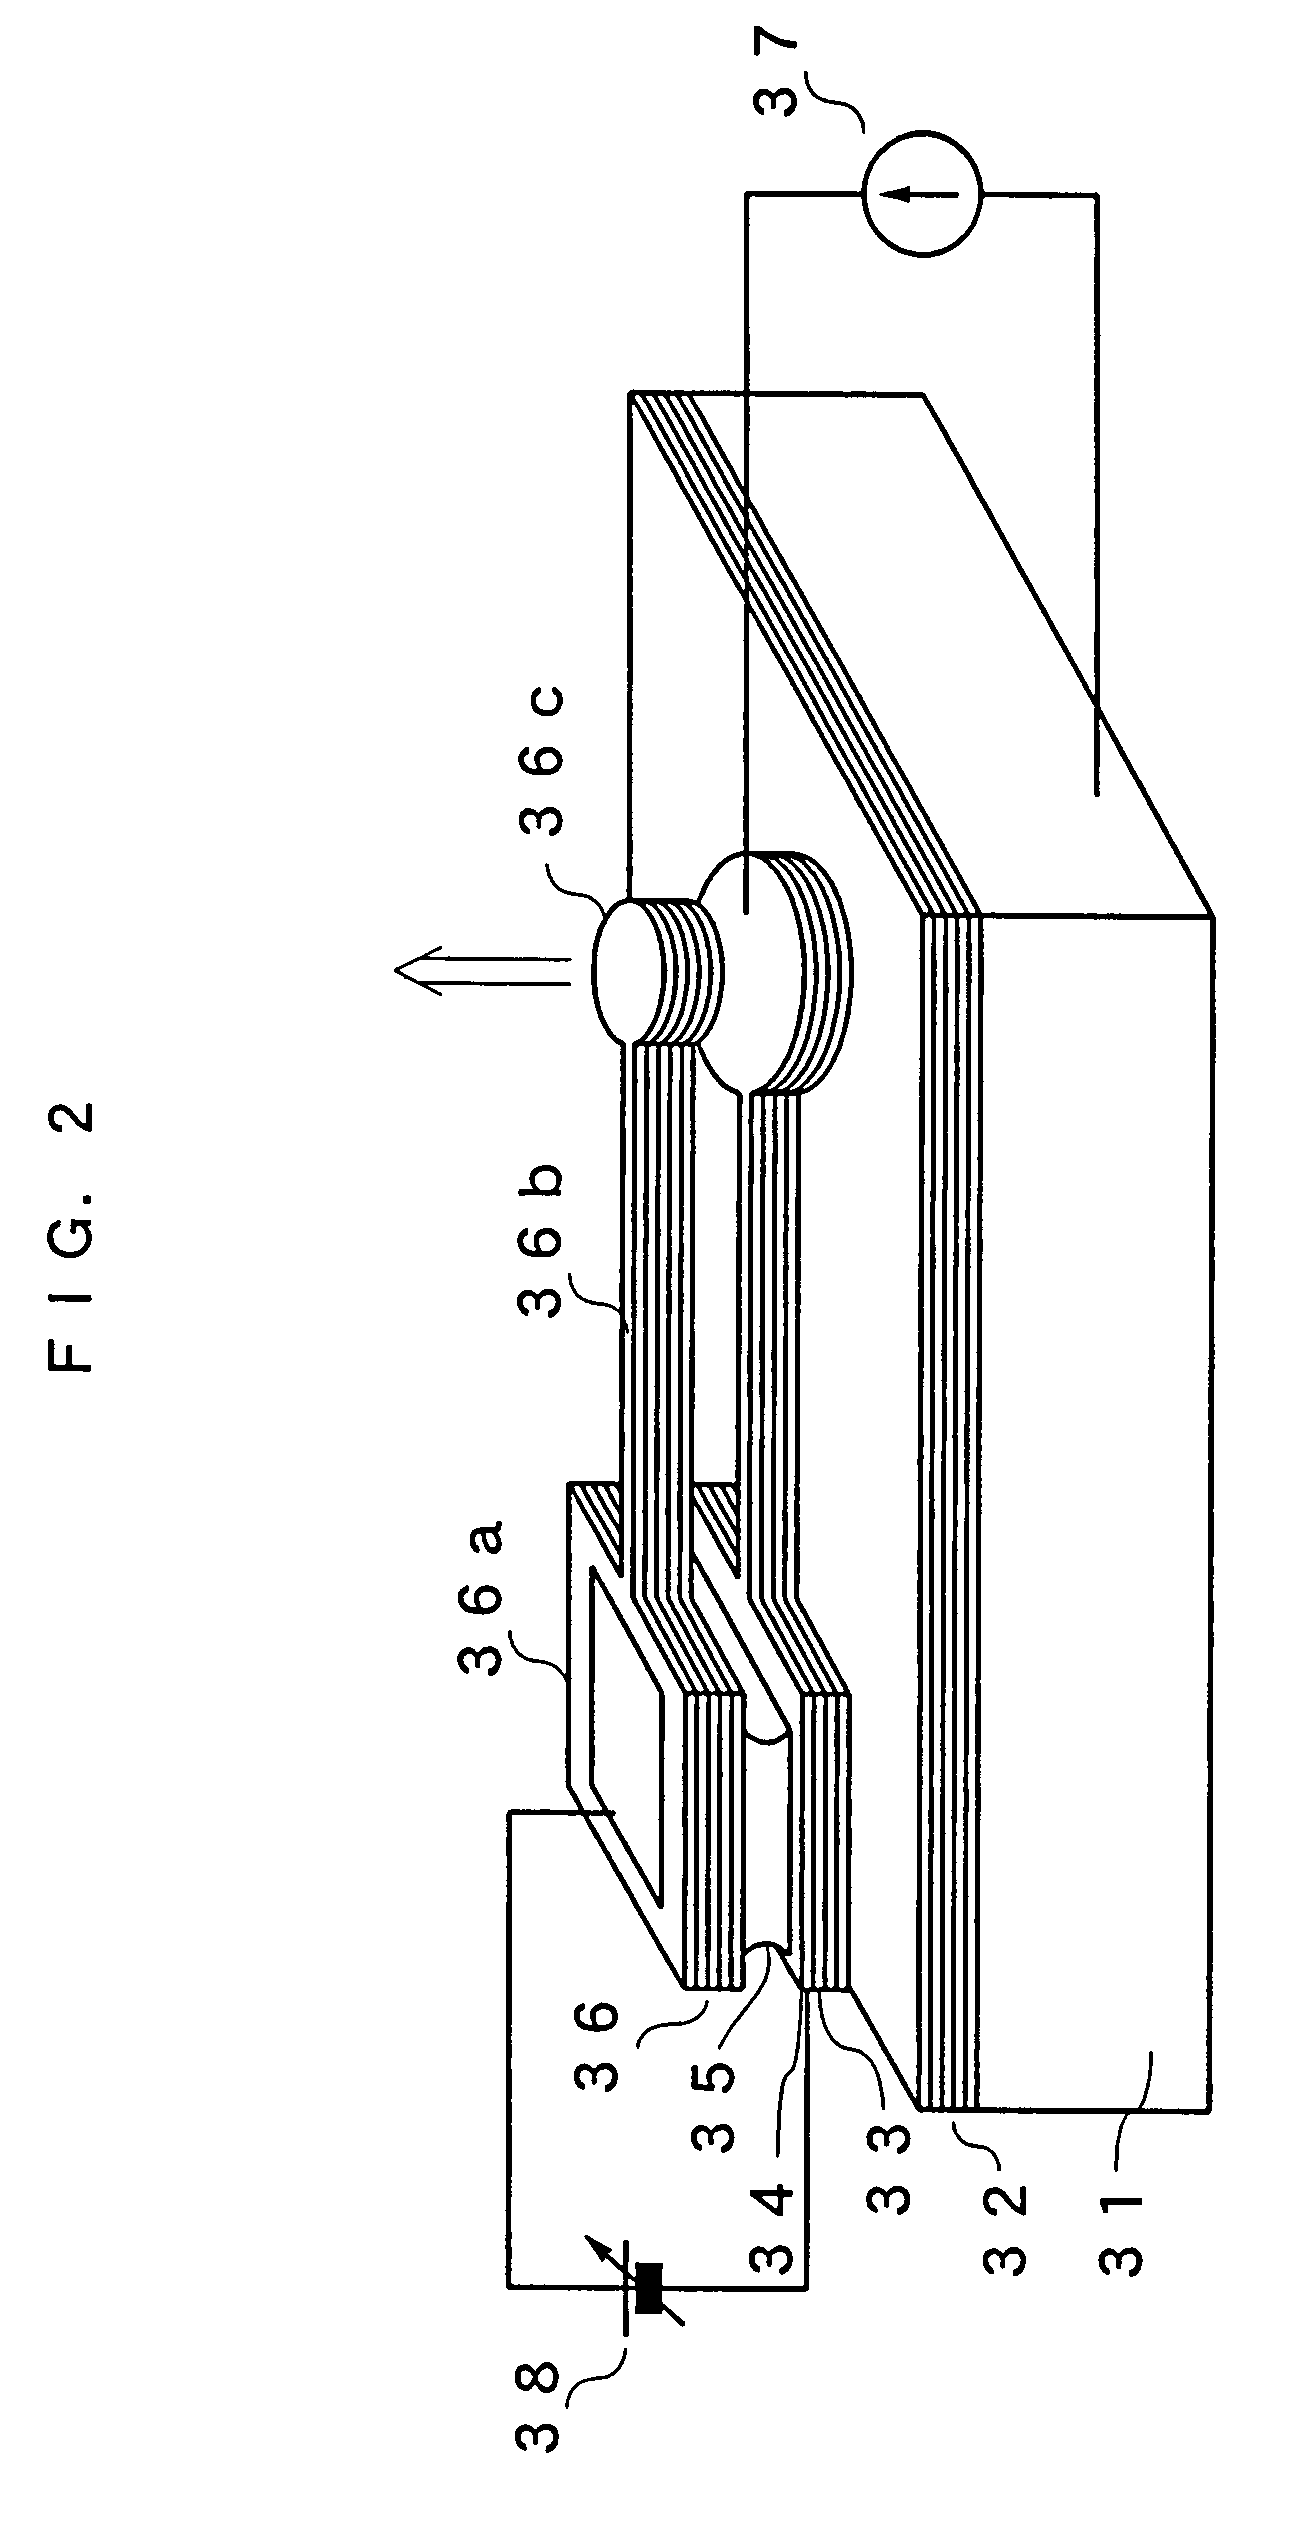 Swept source type optical coherent tomography system